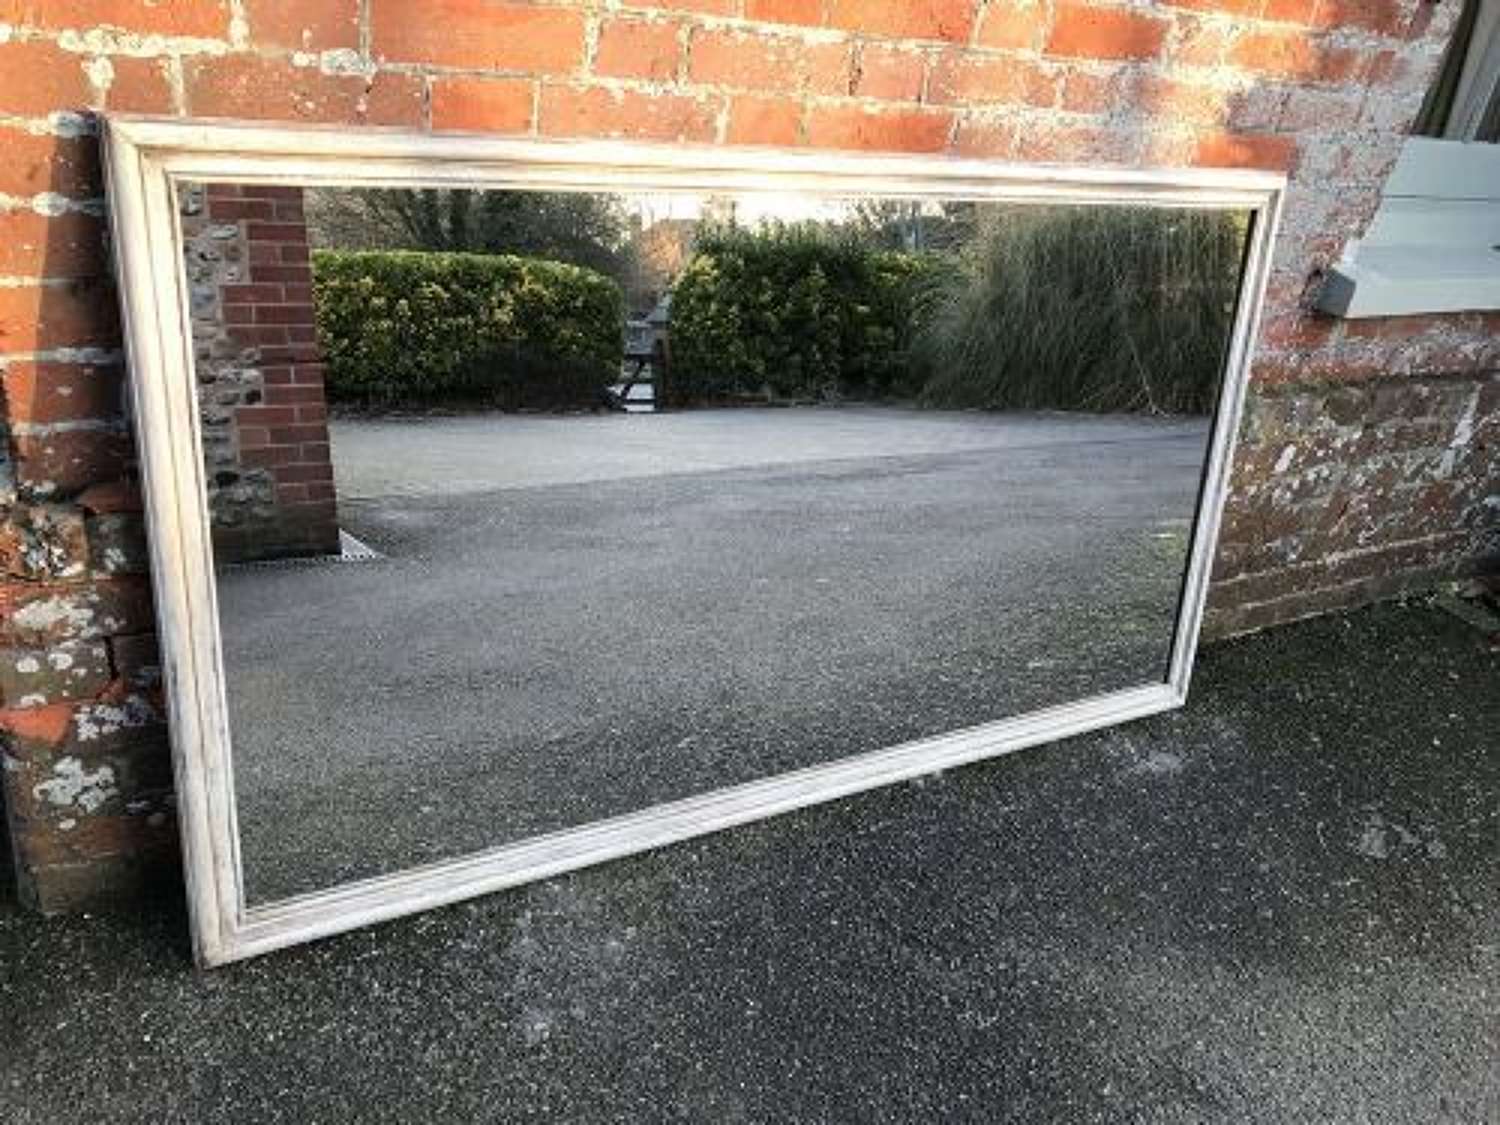 A Stunning Large Antique 19th Century French Painted Plain Mirror